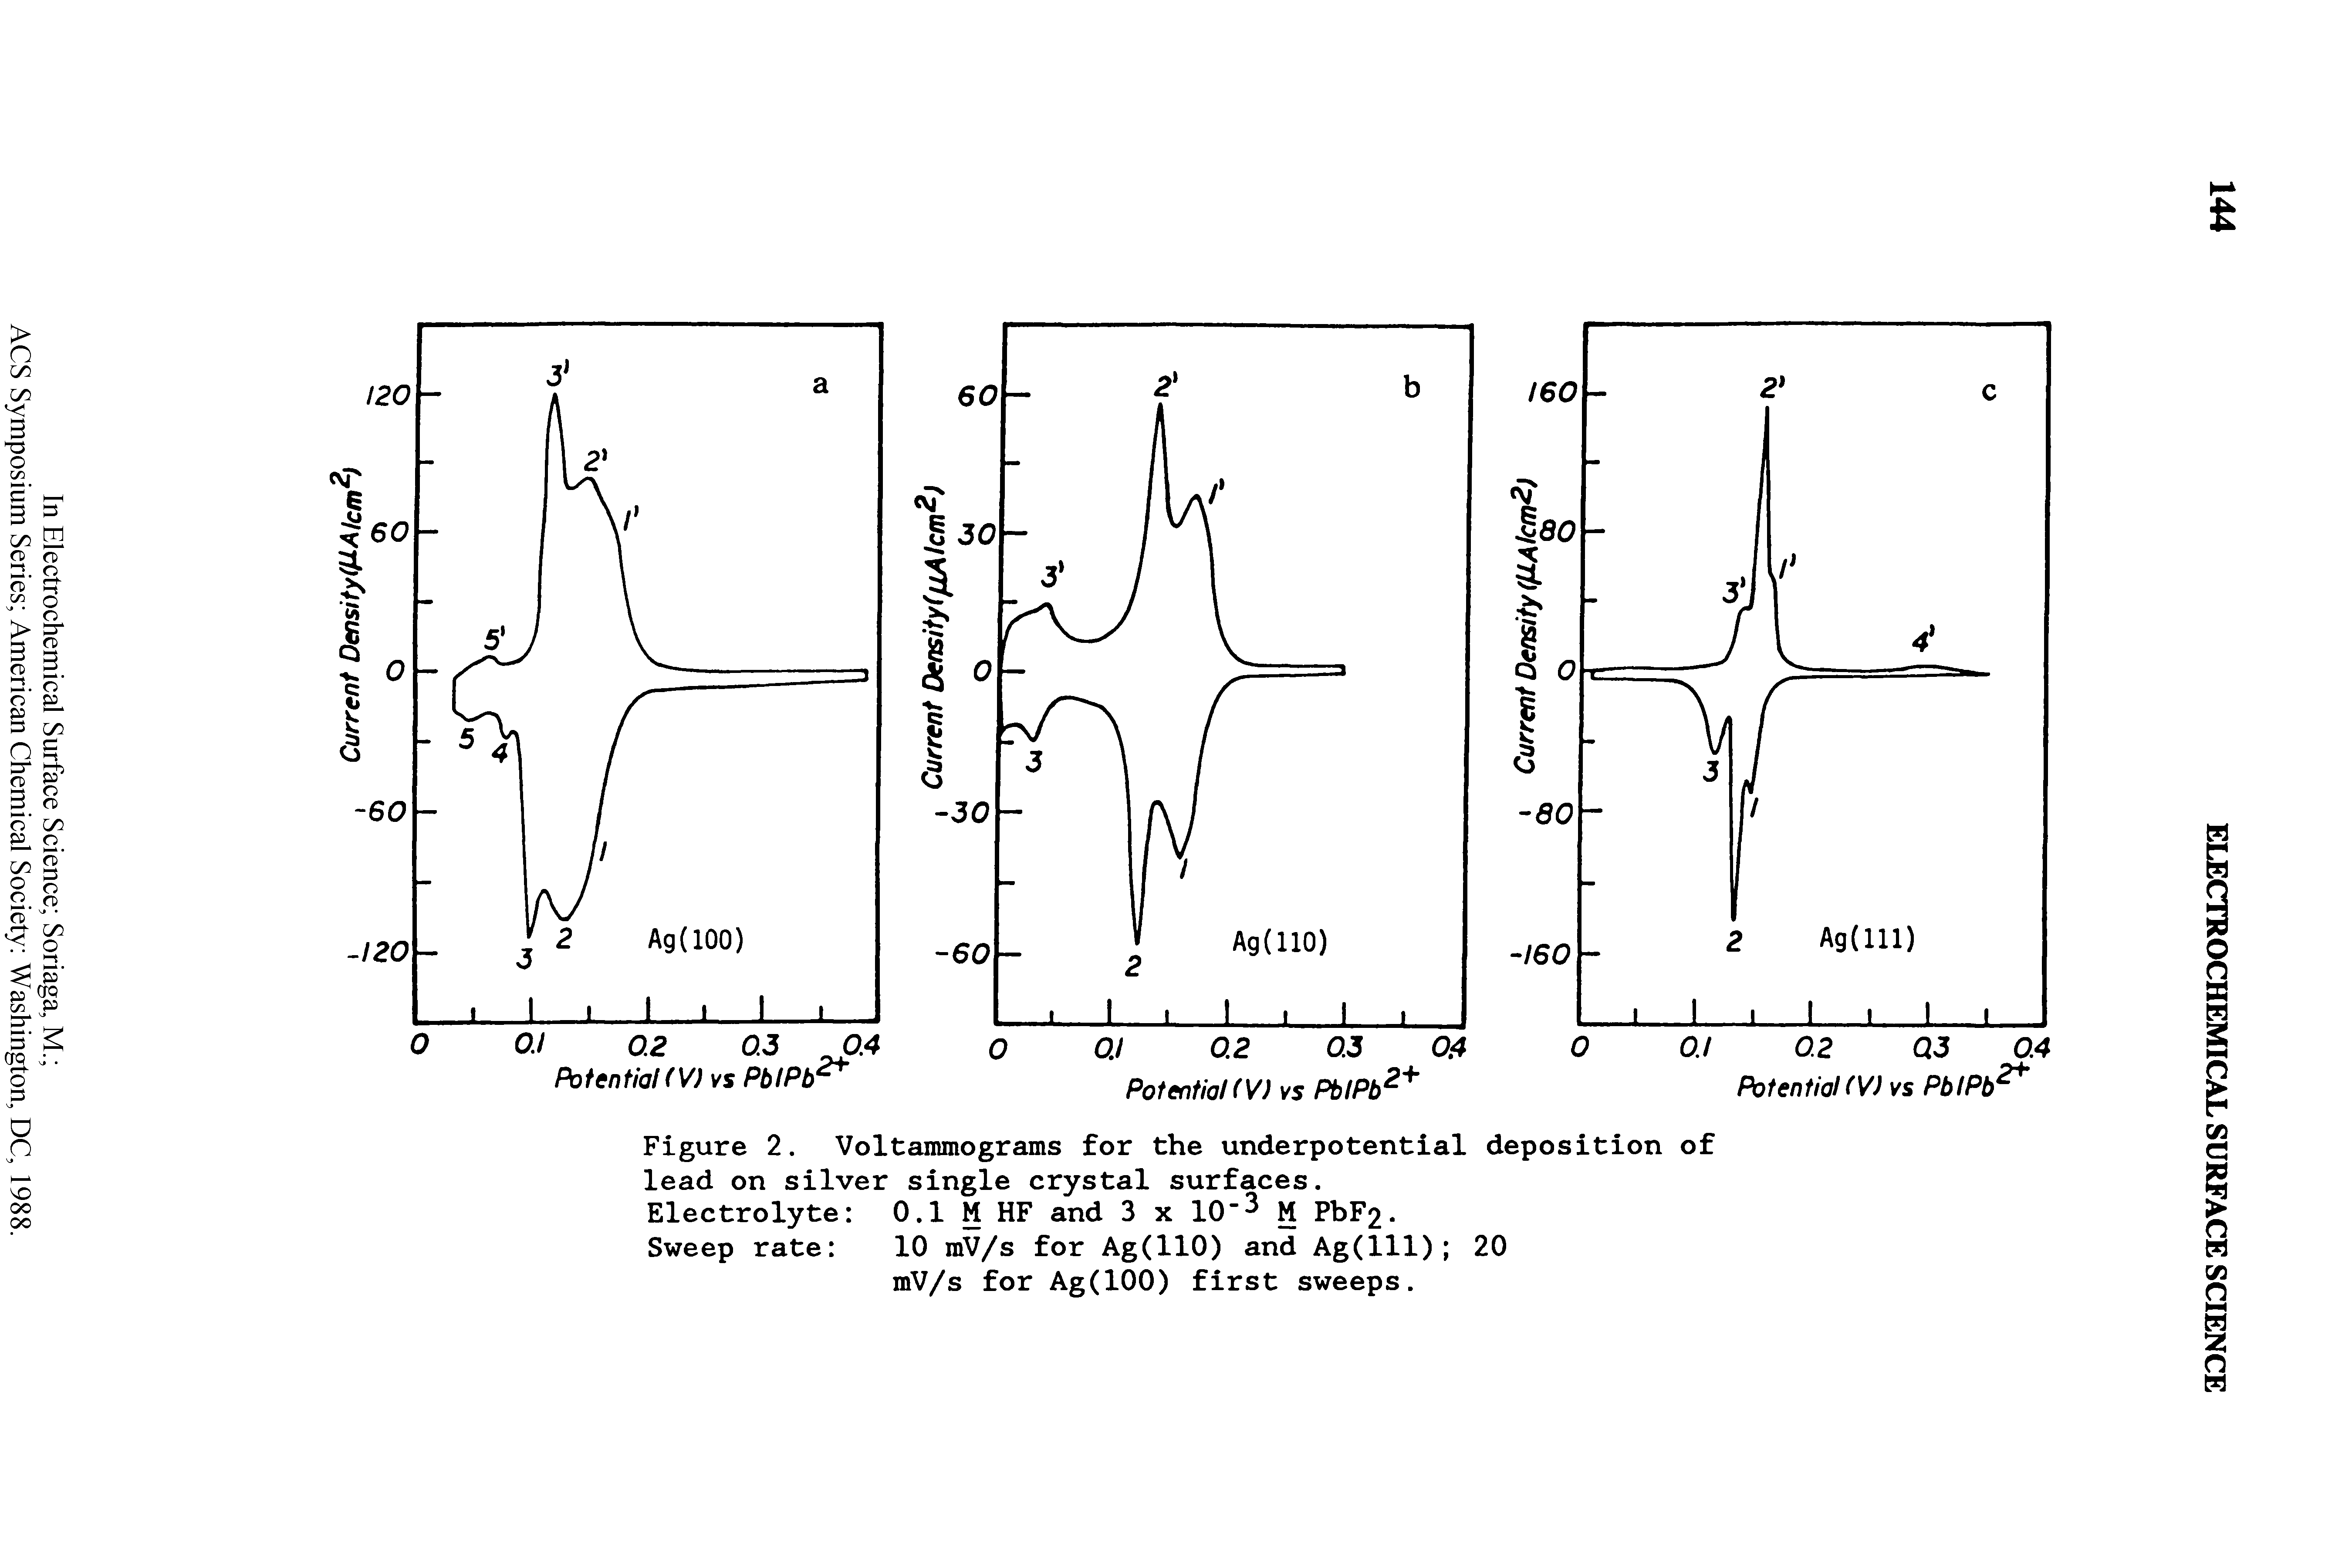 Figure 2. Voltammograms for the underpotential deposition of lead on silver single crystal surfaces.